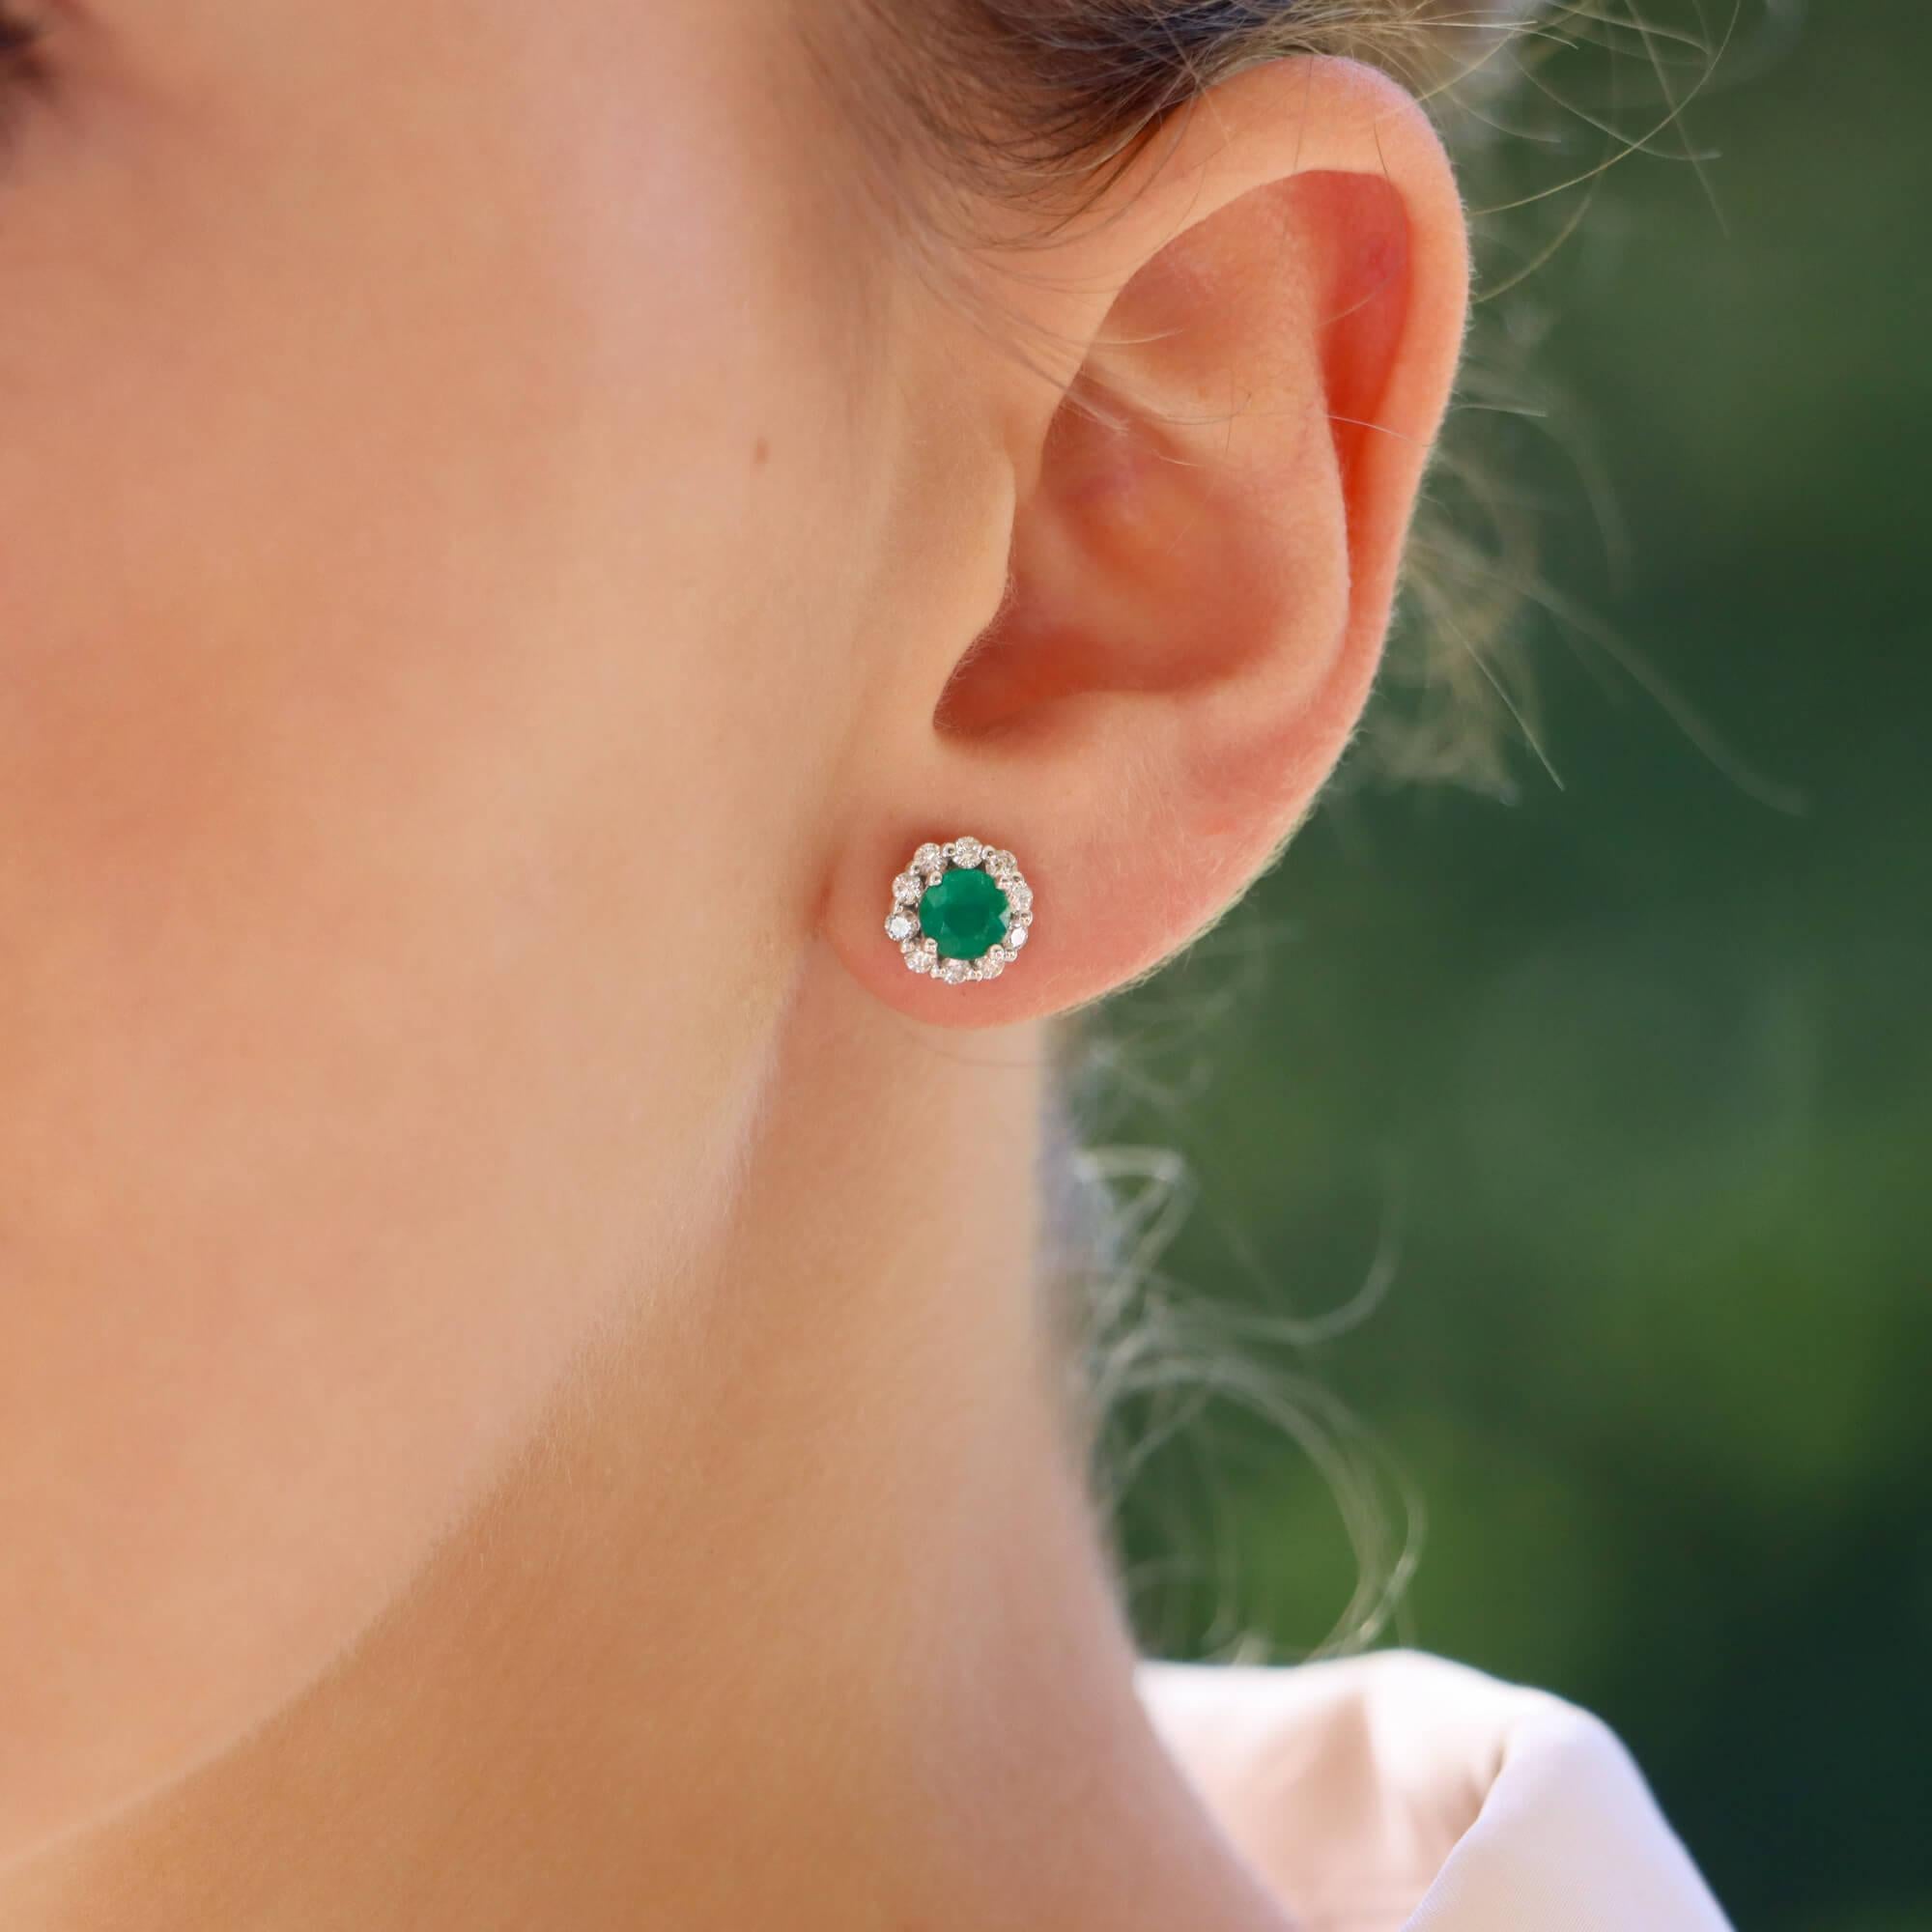 An elegant pair of floral diamond and emerald cluster stud earrings set in 18k white gold.

Each earring depicts a floral motif centrally set with a vibrant green emerald and surrounded by 10 round brilliant cut diamonds. The earrings are secured to